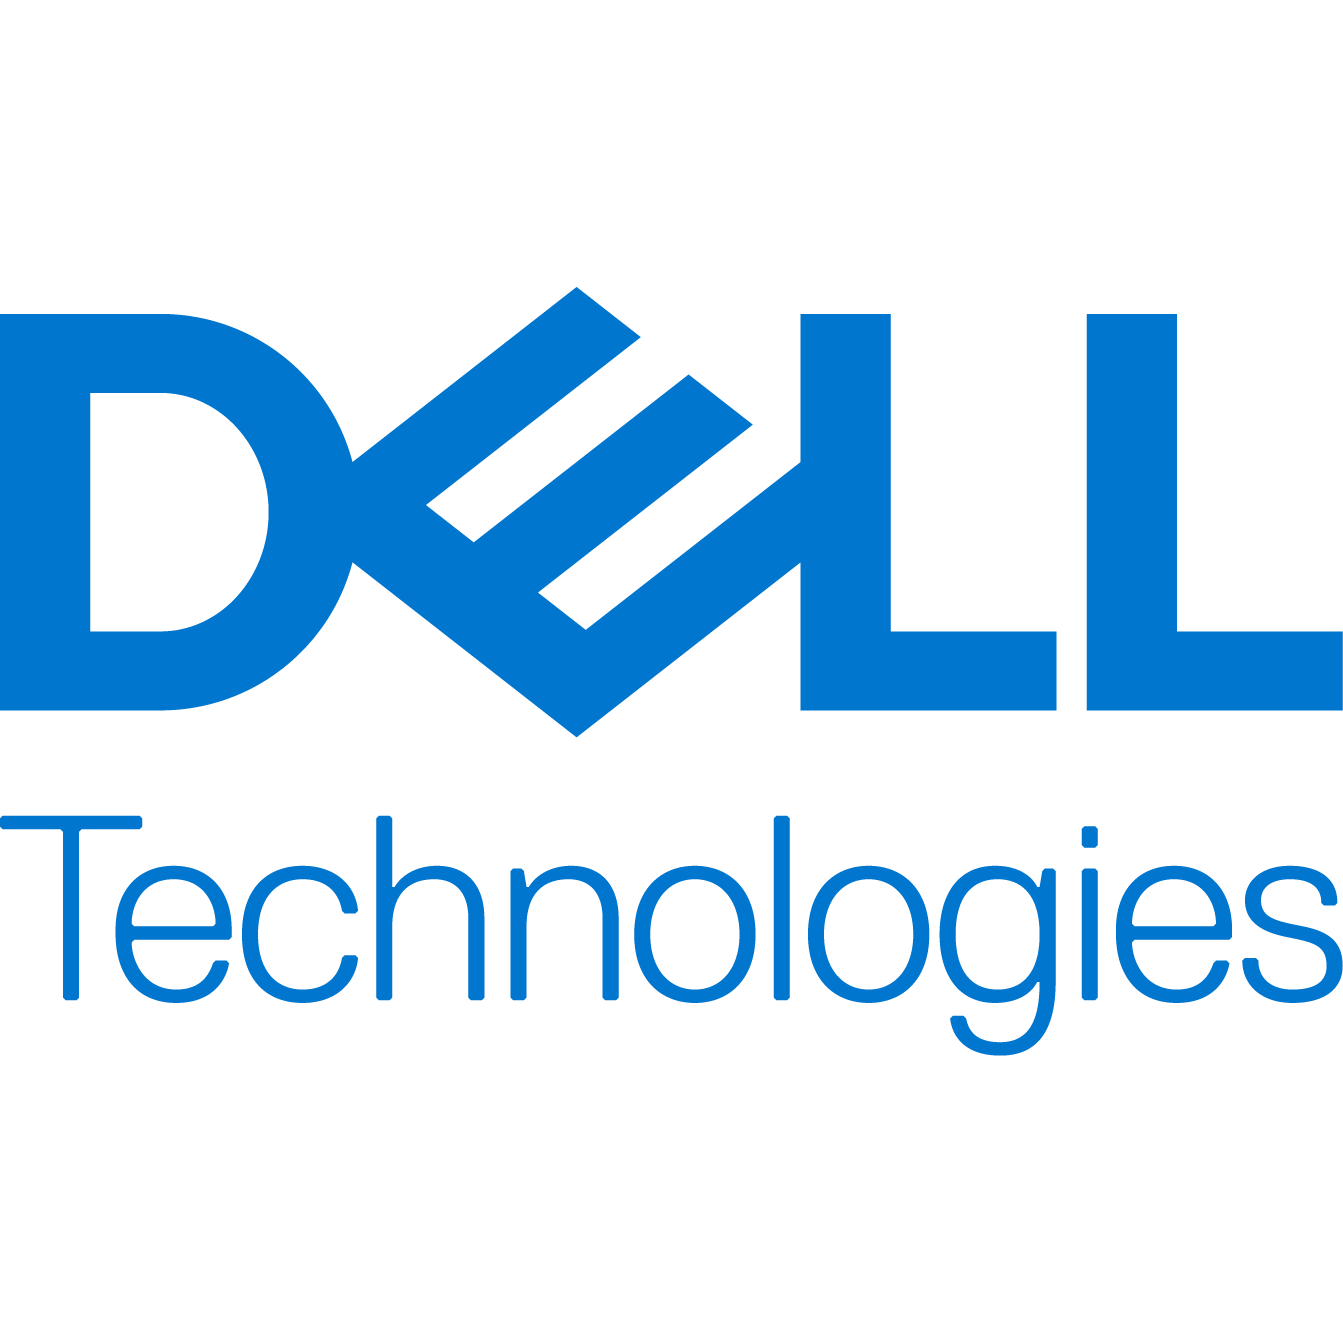 Dell Refurbished Coupon: 45% Off Items priced $499 and Up, 35% off Item $498 and Less